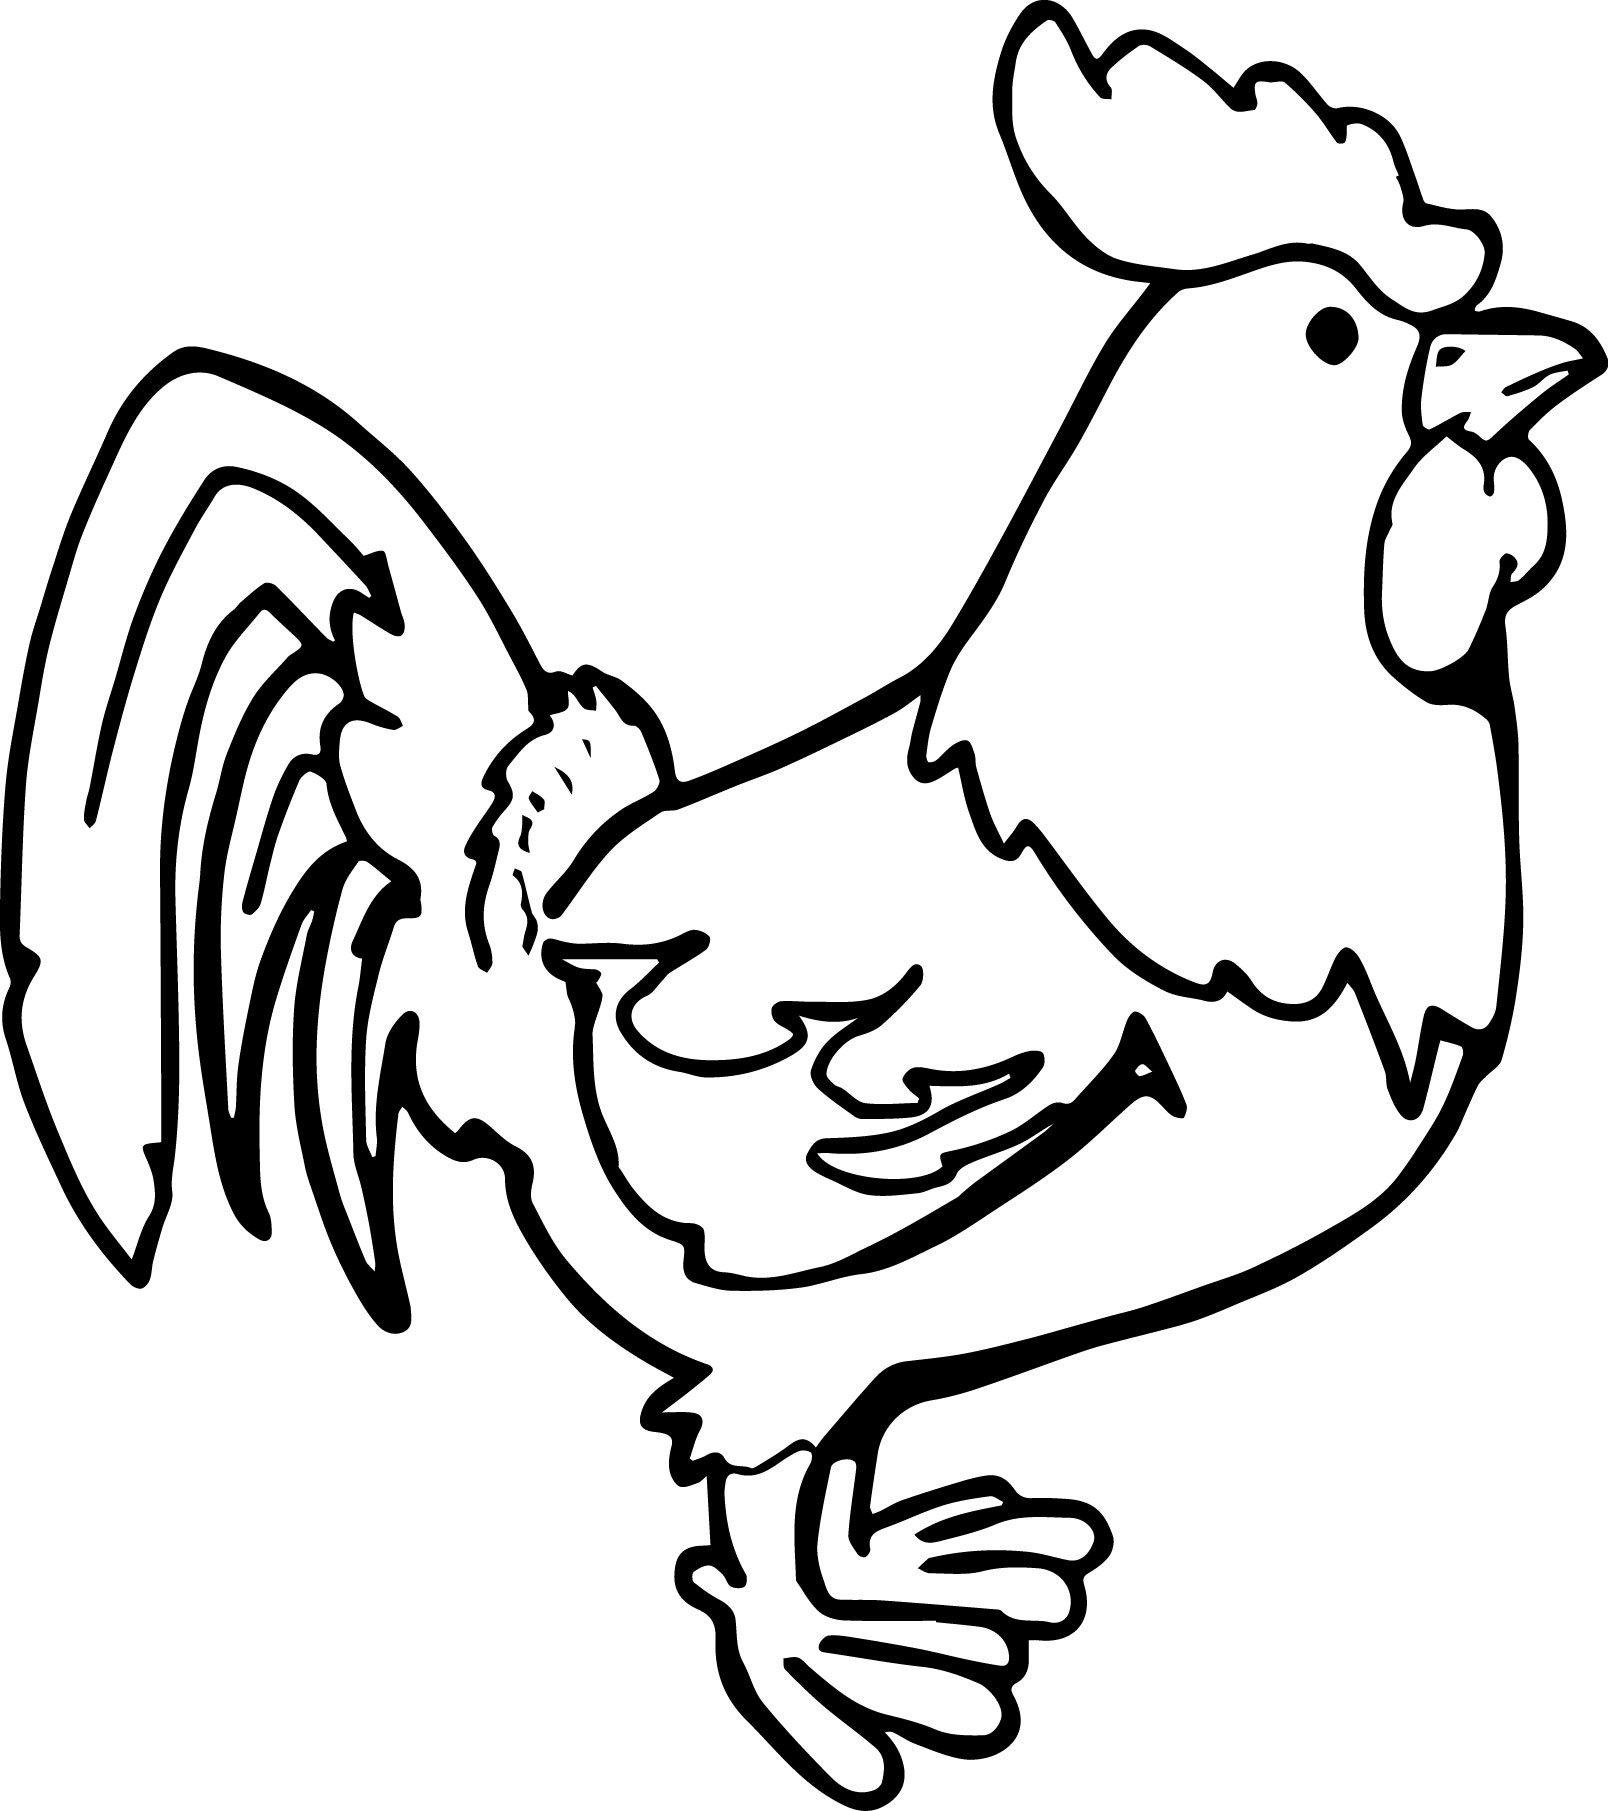 Chickens Coloring Pages
 Chicken Coloring Page